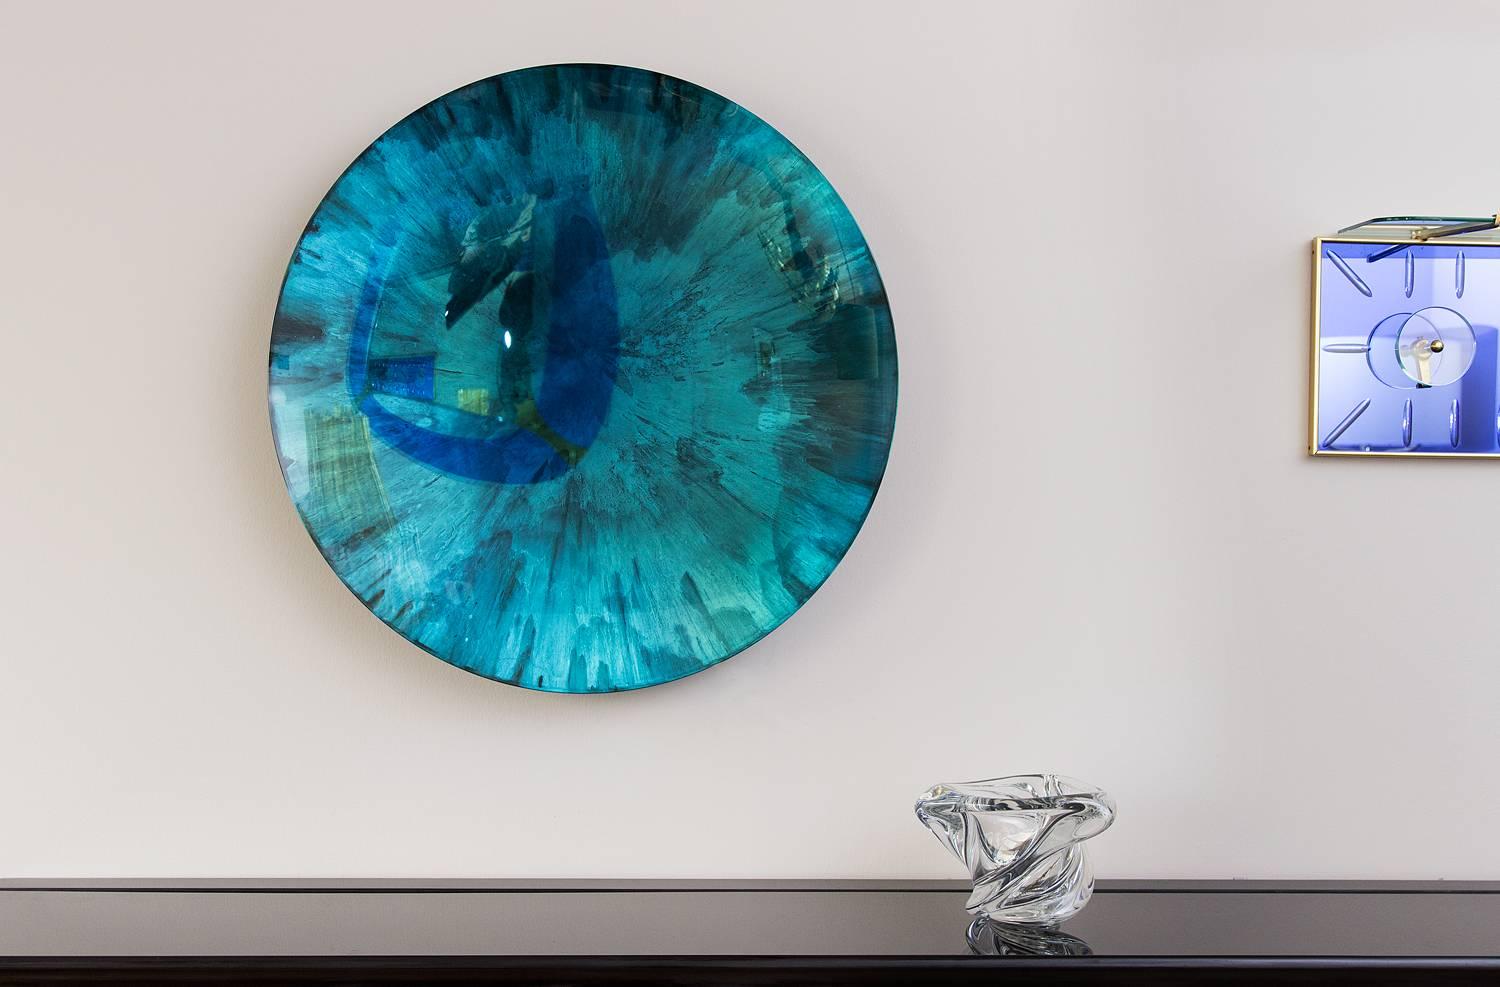 Amazing mirror object by Christophe Gaignon, France in 2015, handmade unique piece by the artist, concave glass bowl, blue green reflections, brass mount, signed on the backside
 
Dimensions: Diameter 89 cm, depth 11 cm.